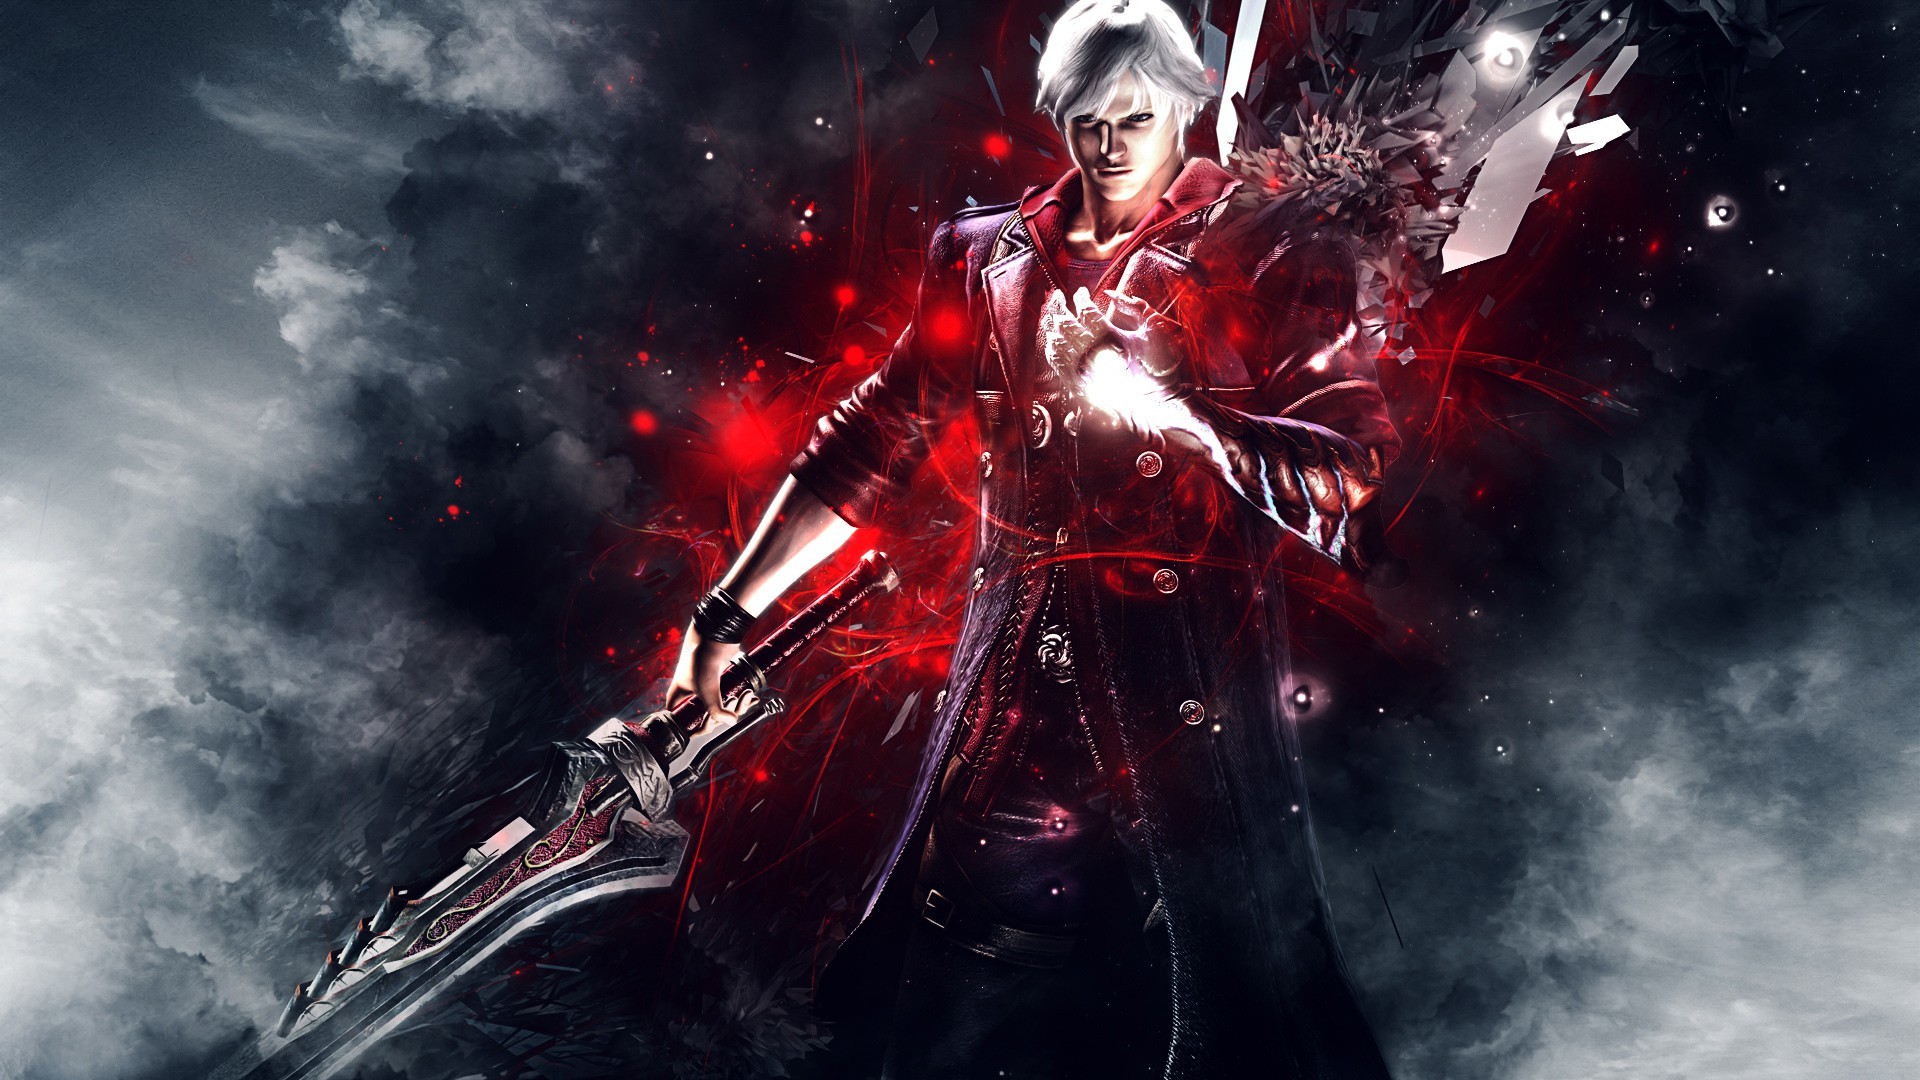 Devil May Cry 4 Nero 1080p Wallpapers, Images, Hd - Hd Wallpaper Devil May  Cry 4 - 1920x1080 Wallpaper 